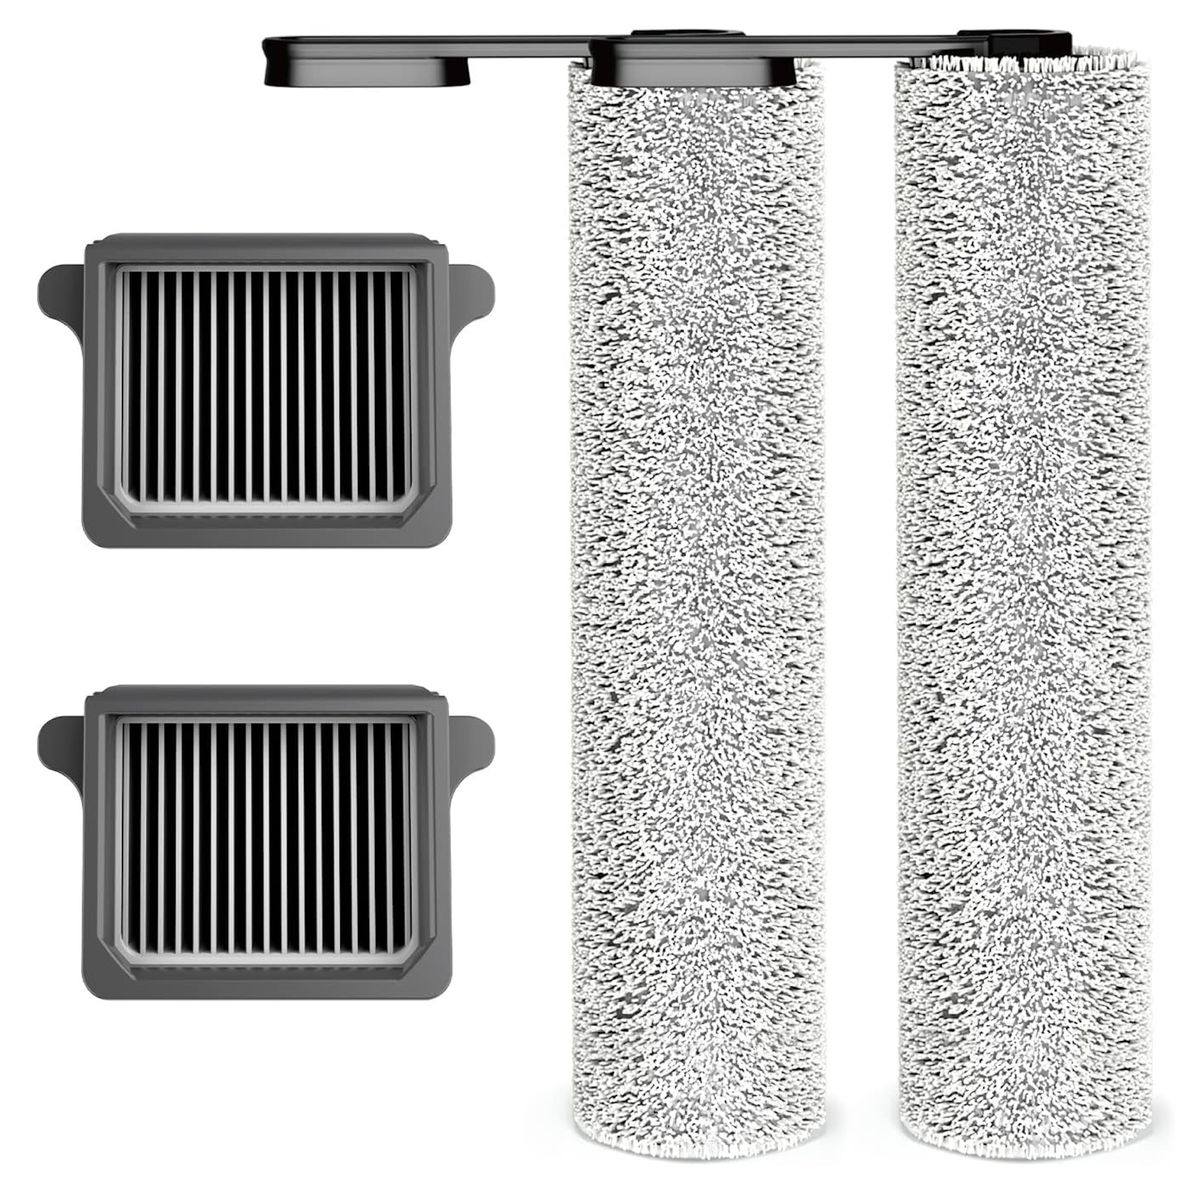 Buy Tineco S7 Pro Hard Floor Cleaner Replacement Brush Roll